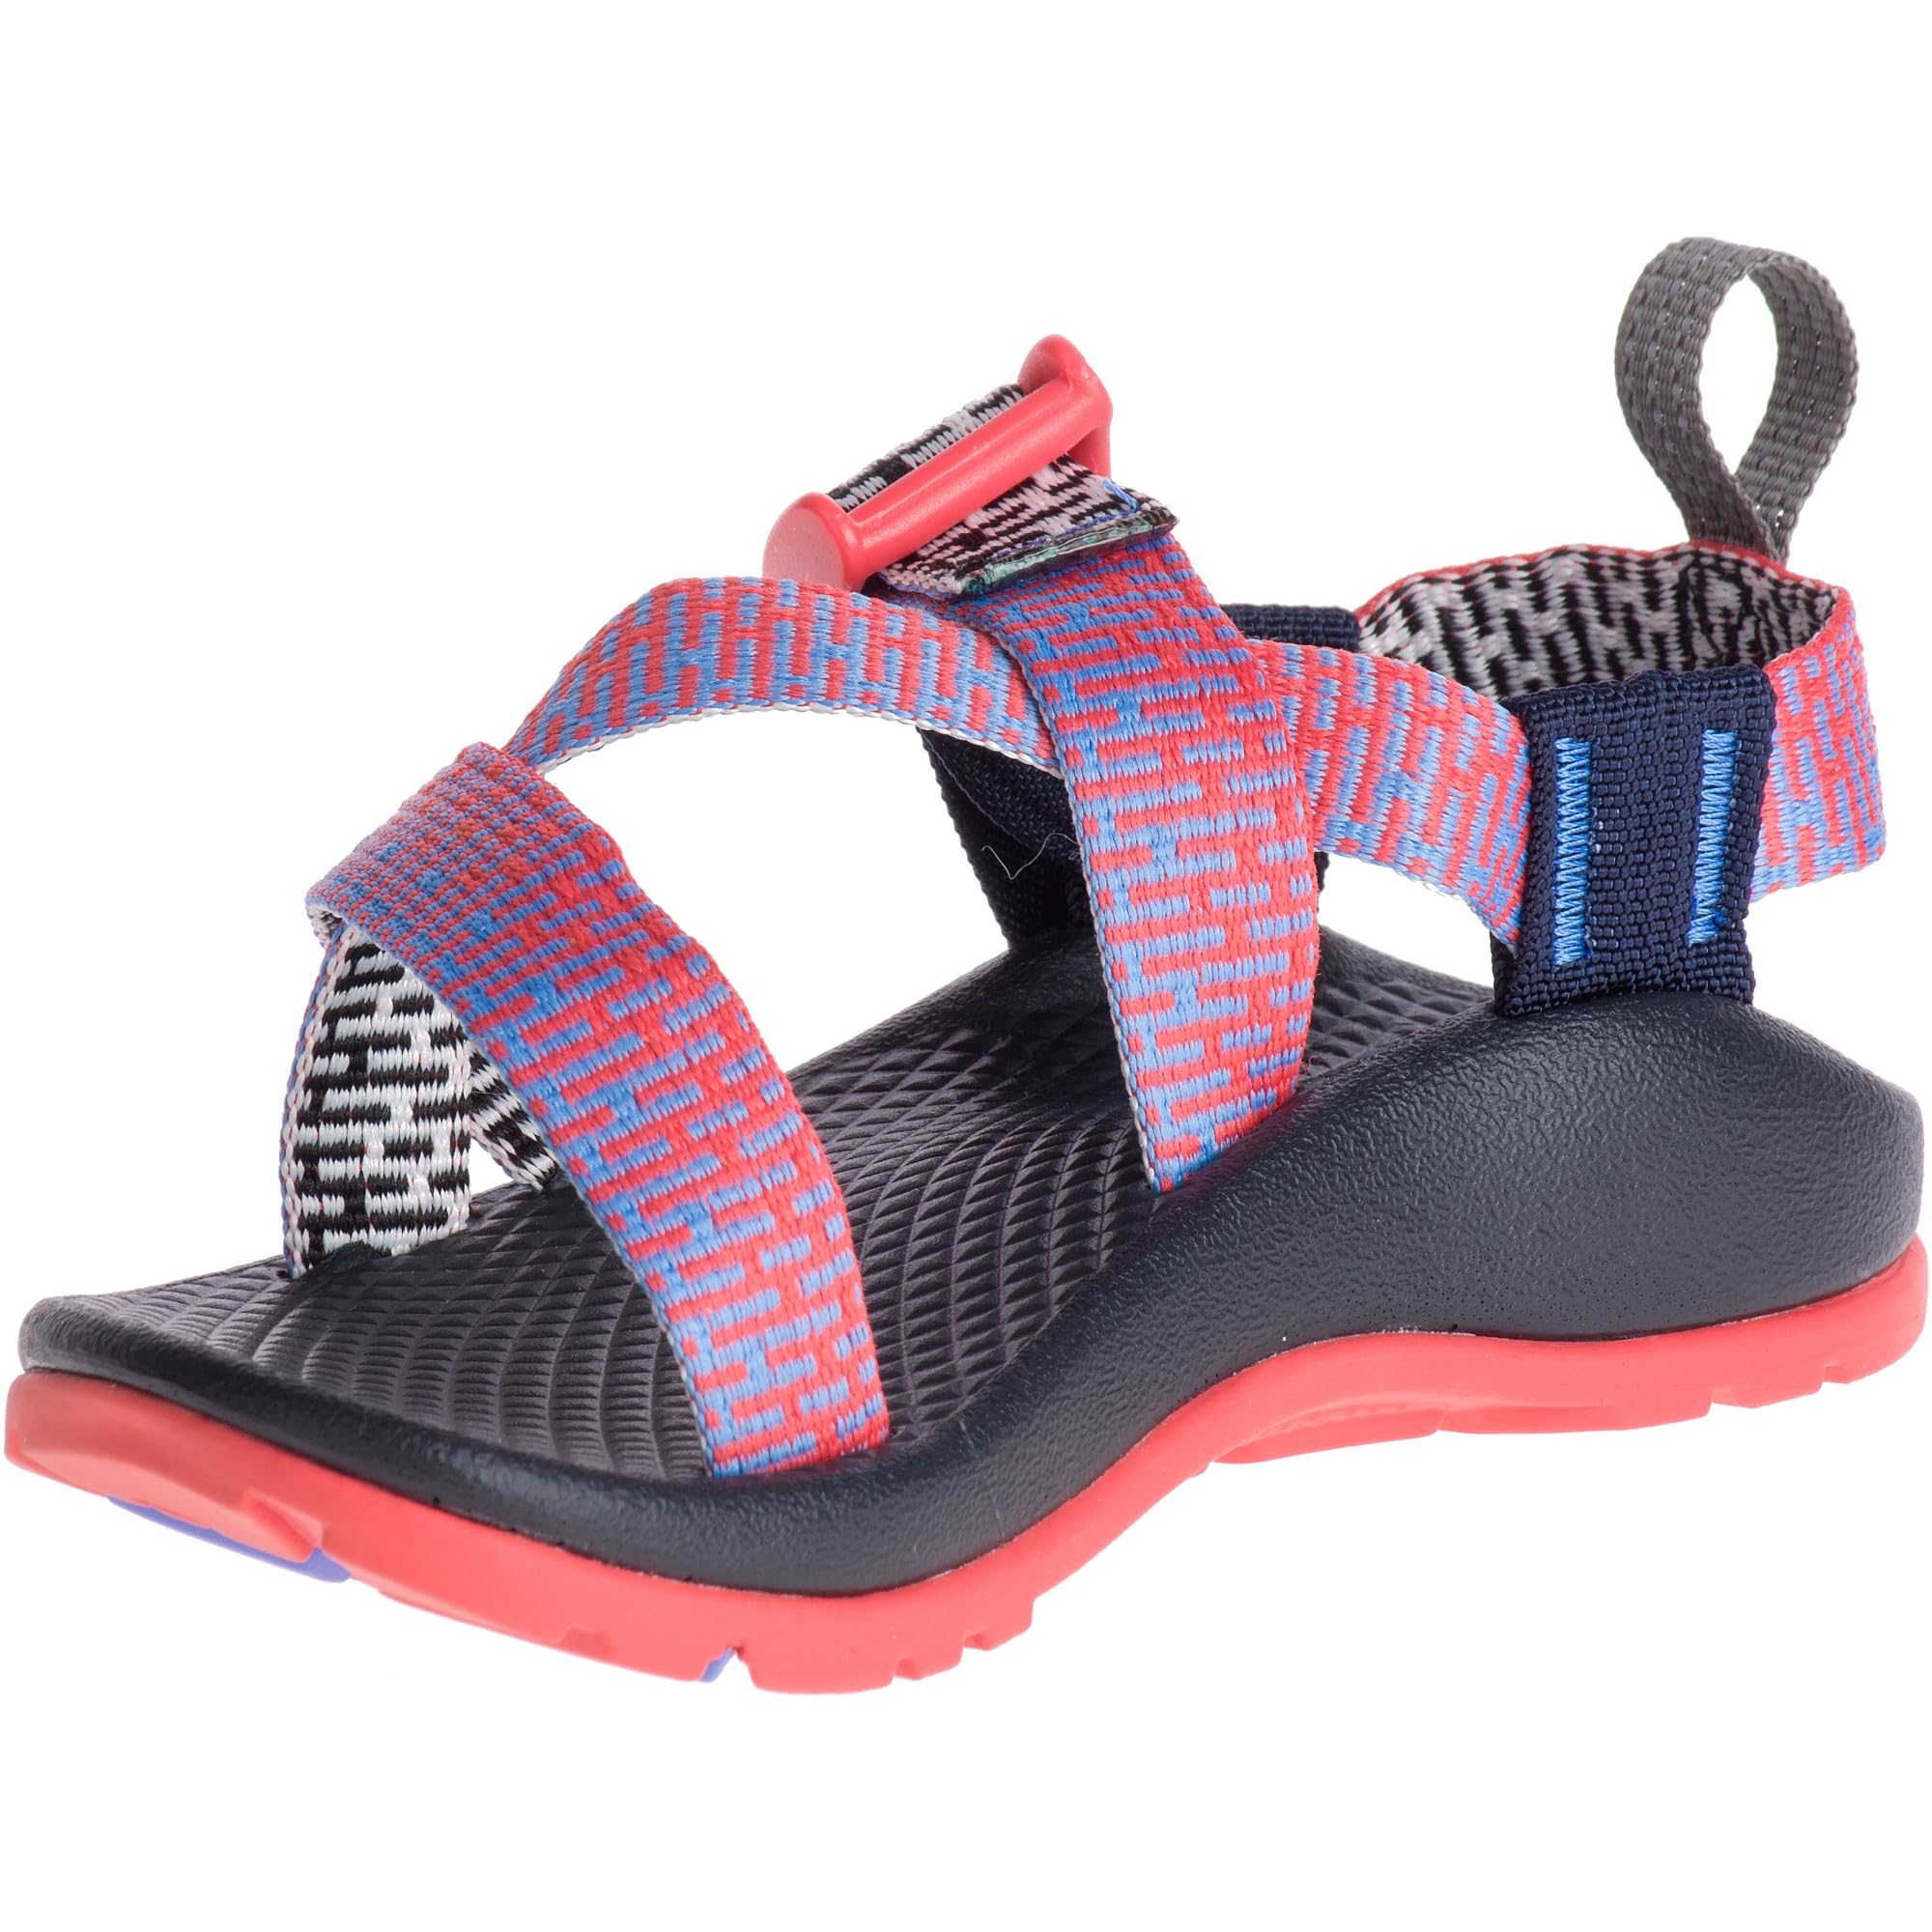 Chaco-womens Z1 Ecotread Sport Sandal, Penny Coral, 2 Big Kid US